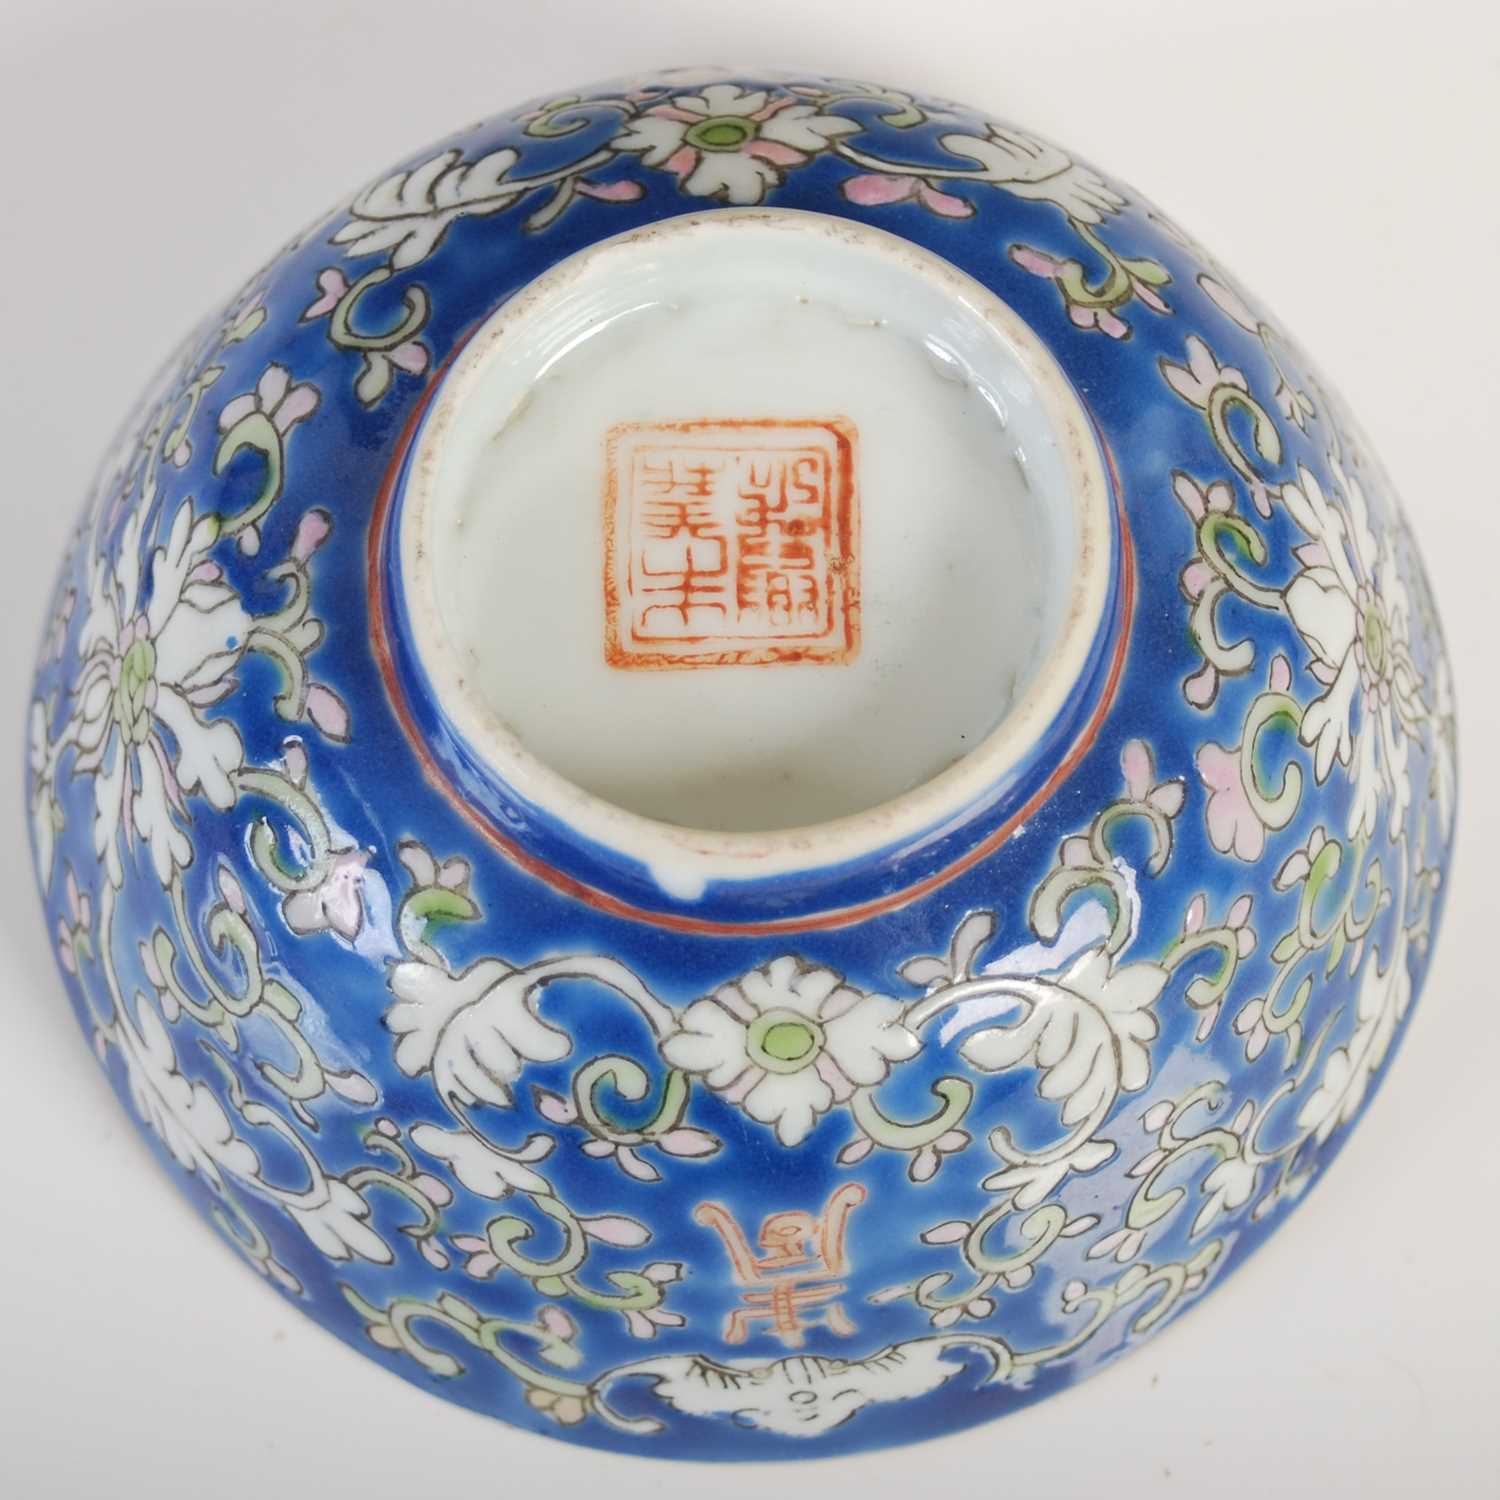 A Chinese porcelain blue ground footed bowl, late 19th/ early 20th century, decorated with lotus - Image 5 of 6